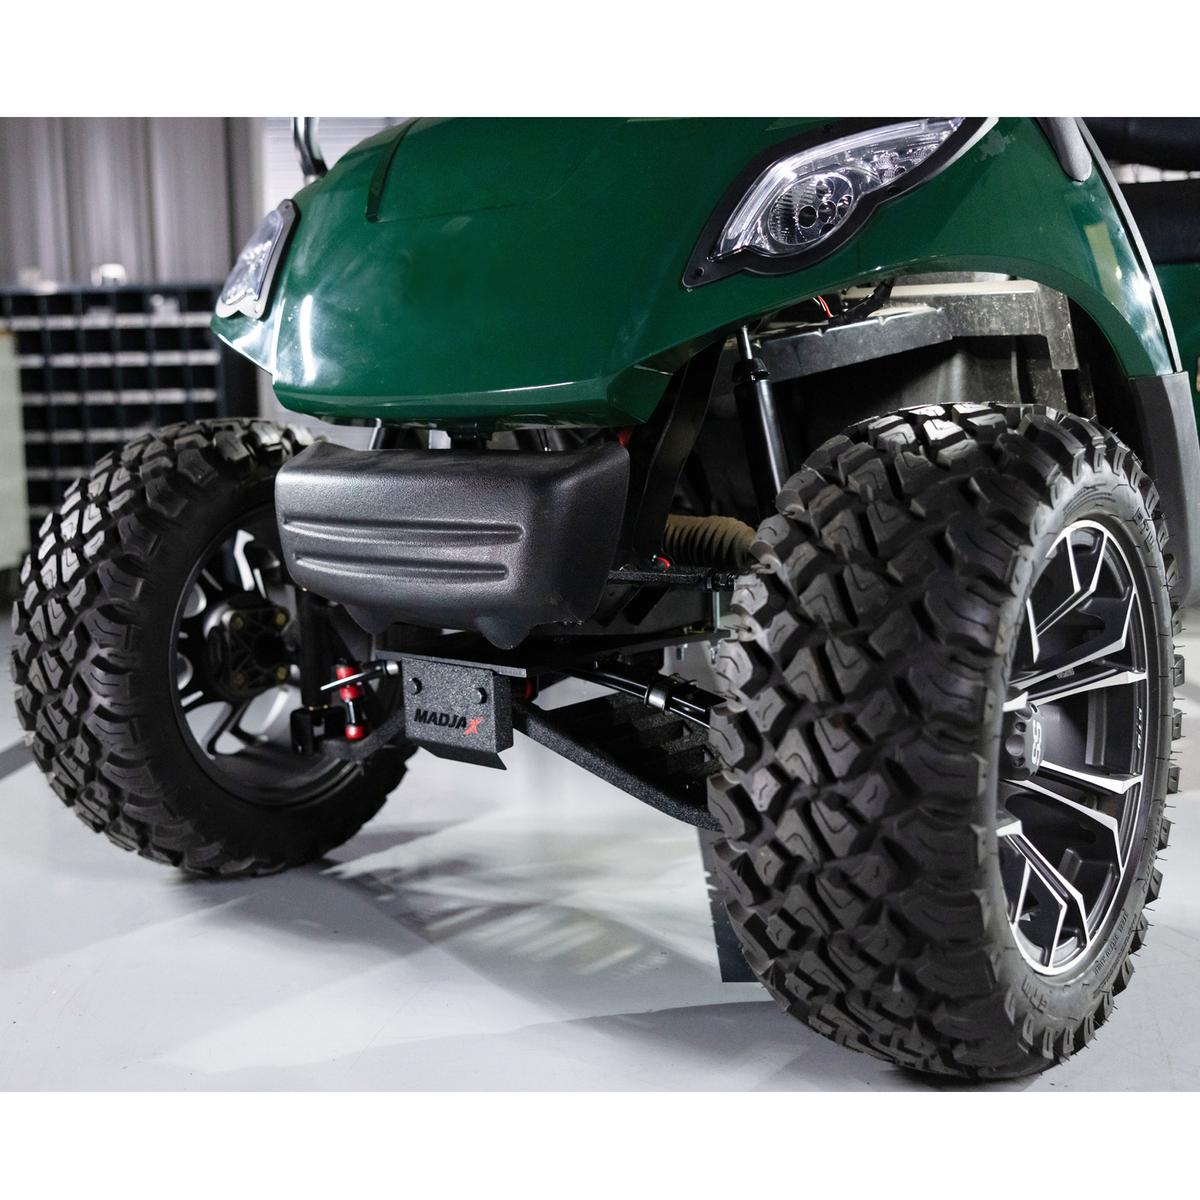 4” MadJax King XD Lift Kit for Gas Yamaha Drive2 with Independent Rear Suspension